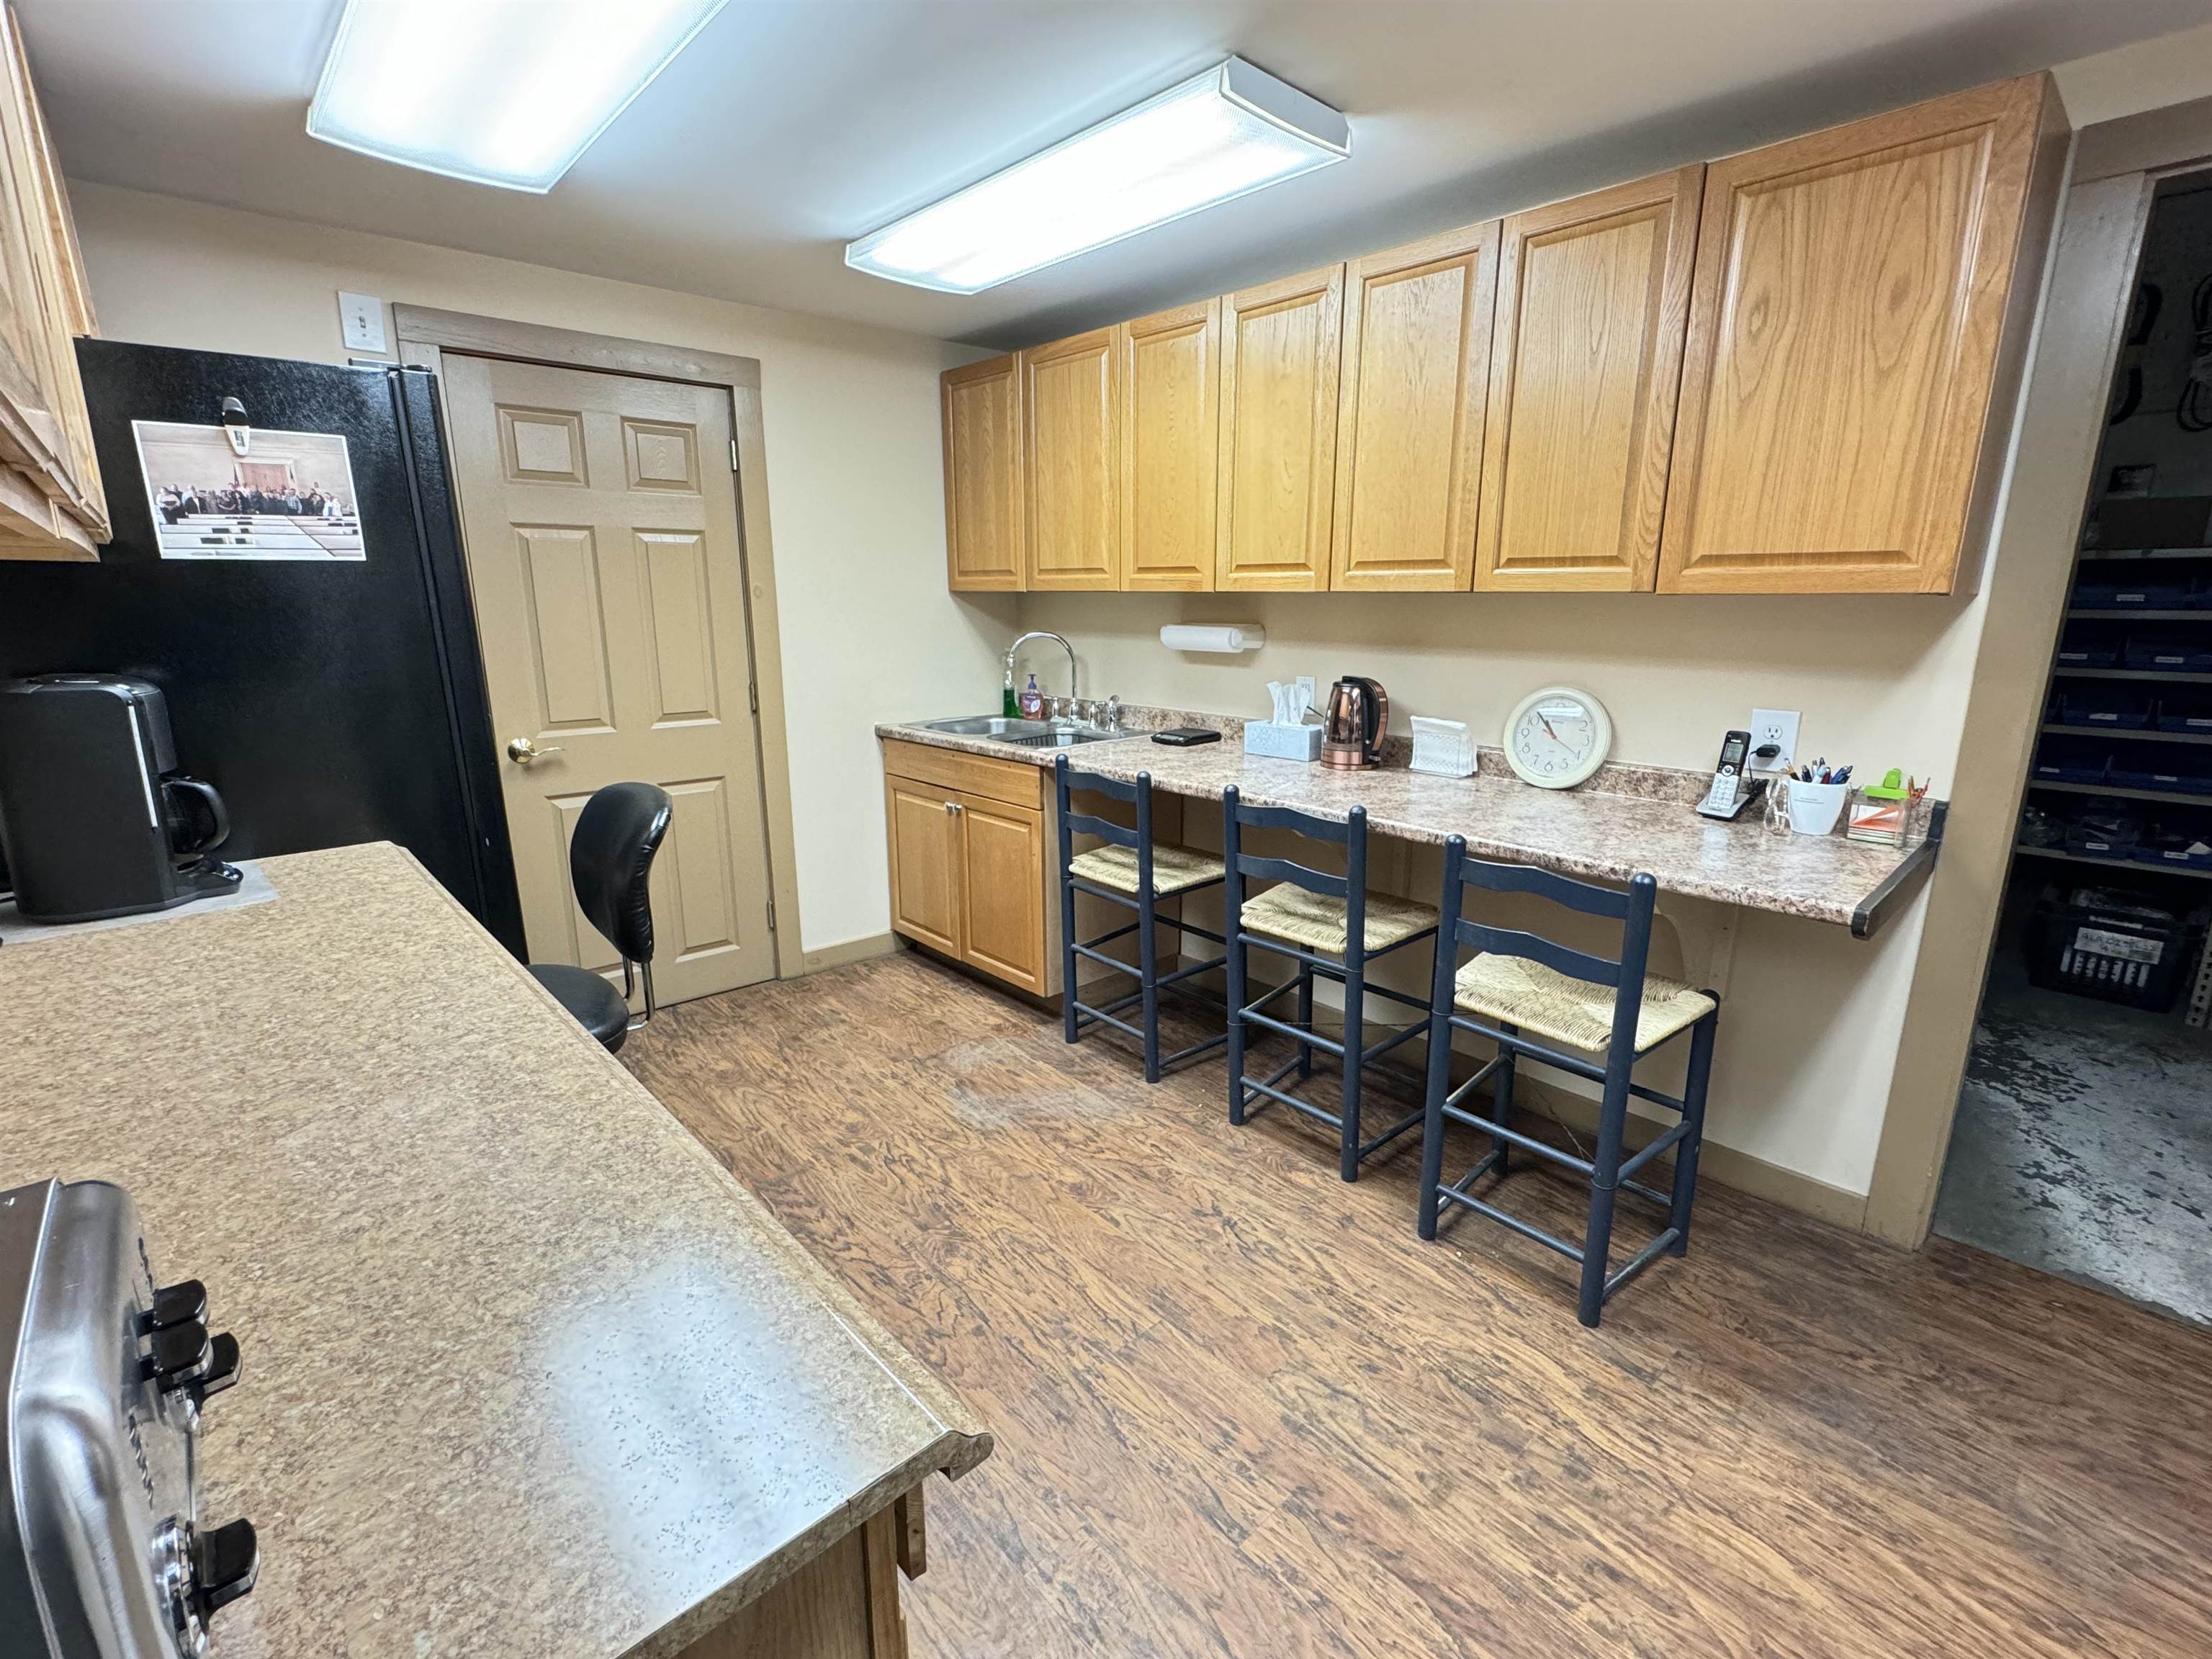 kitchenette/lunch room area